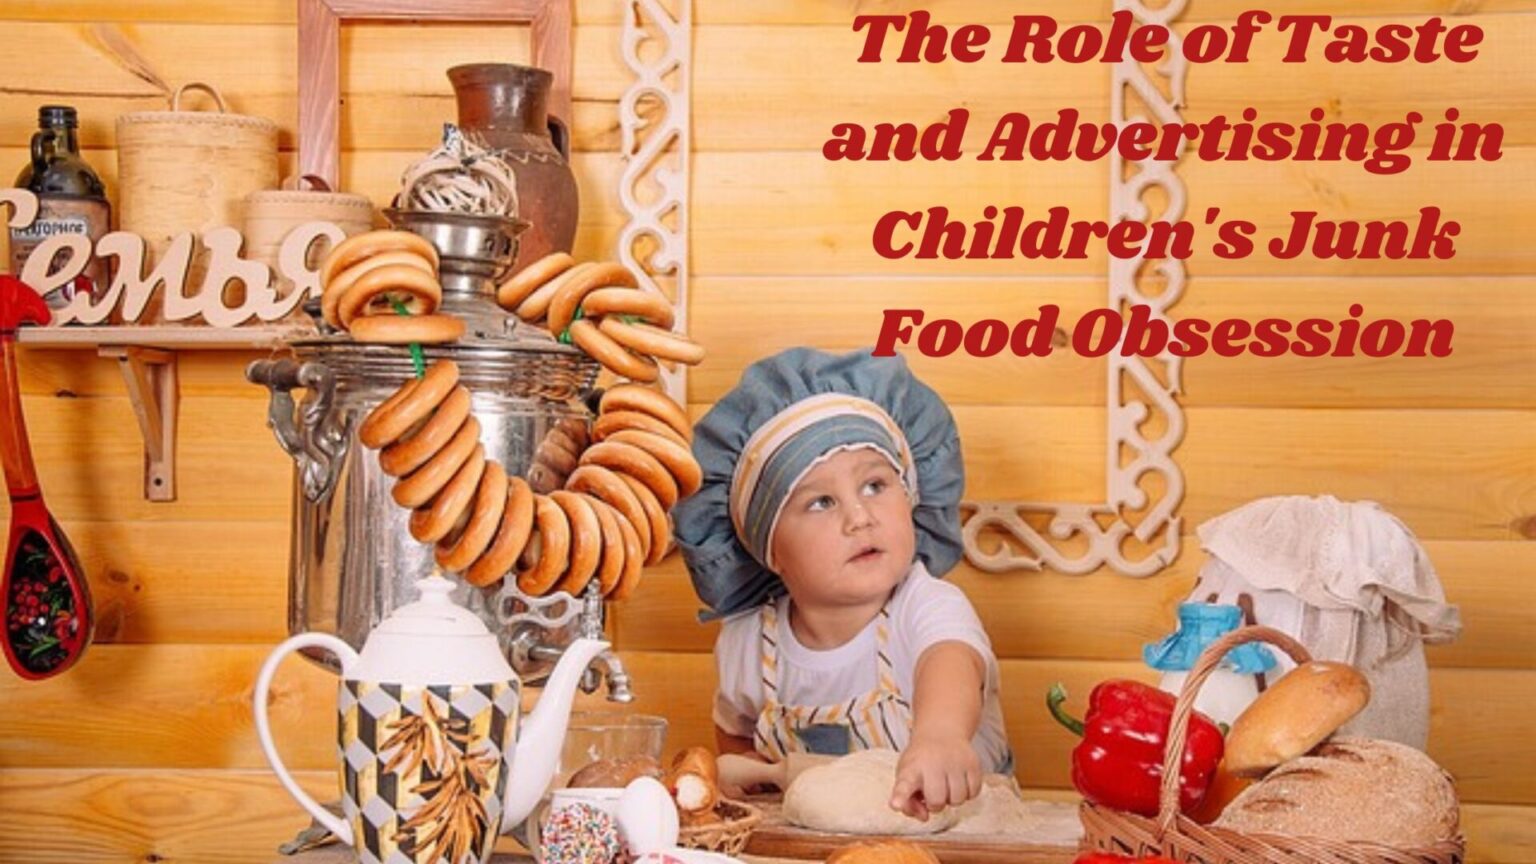 The Role of Taste and Advertising in Children's Junk Food Obsession